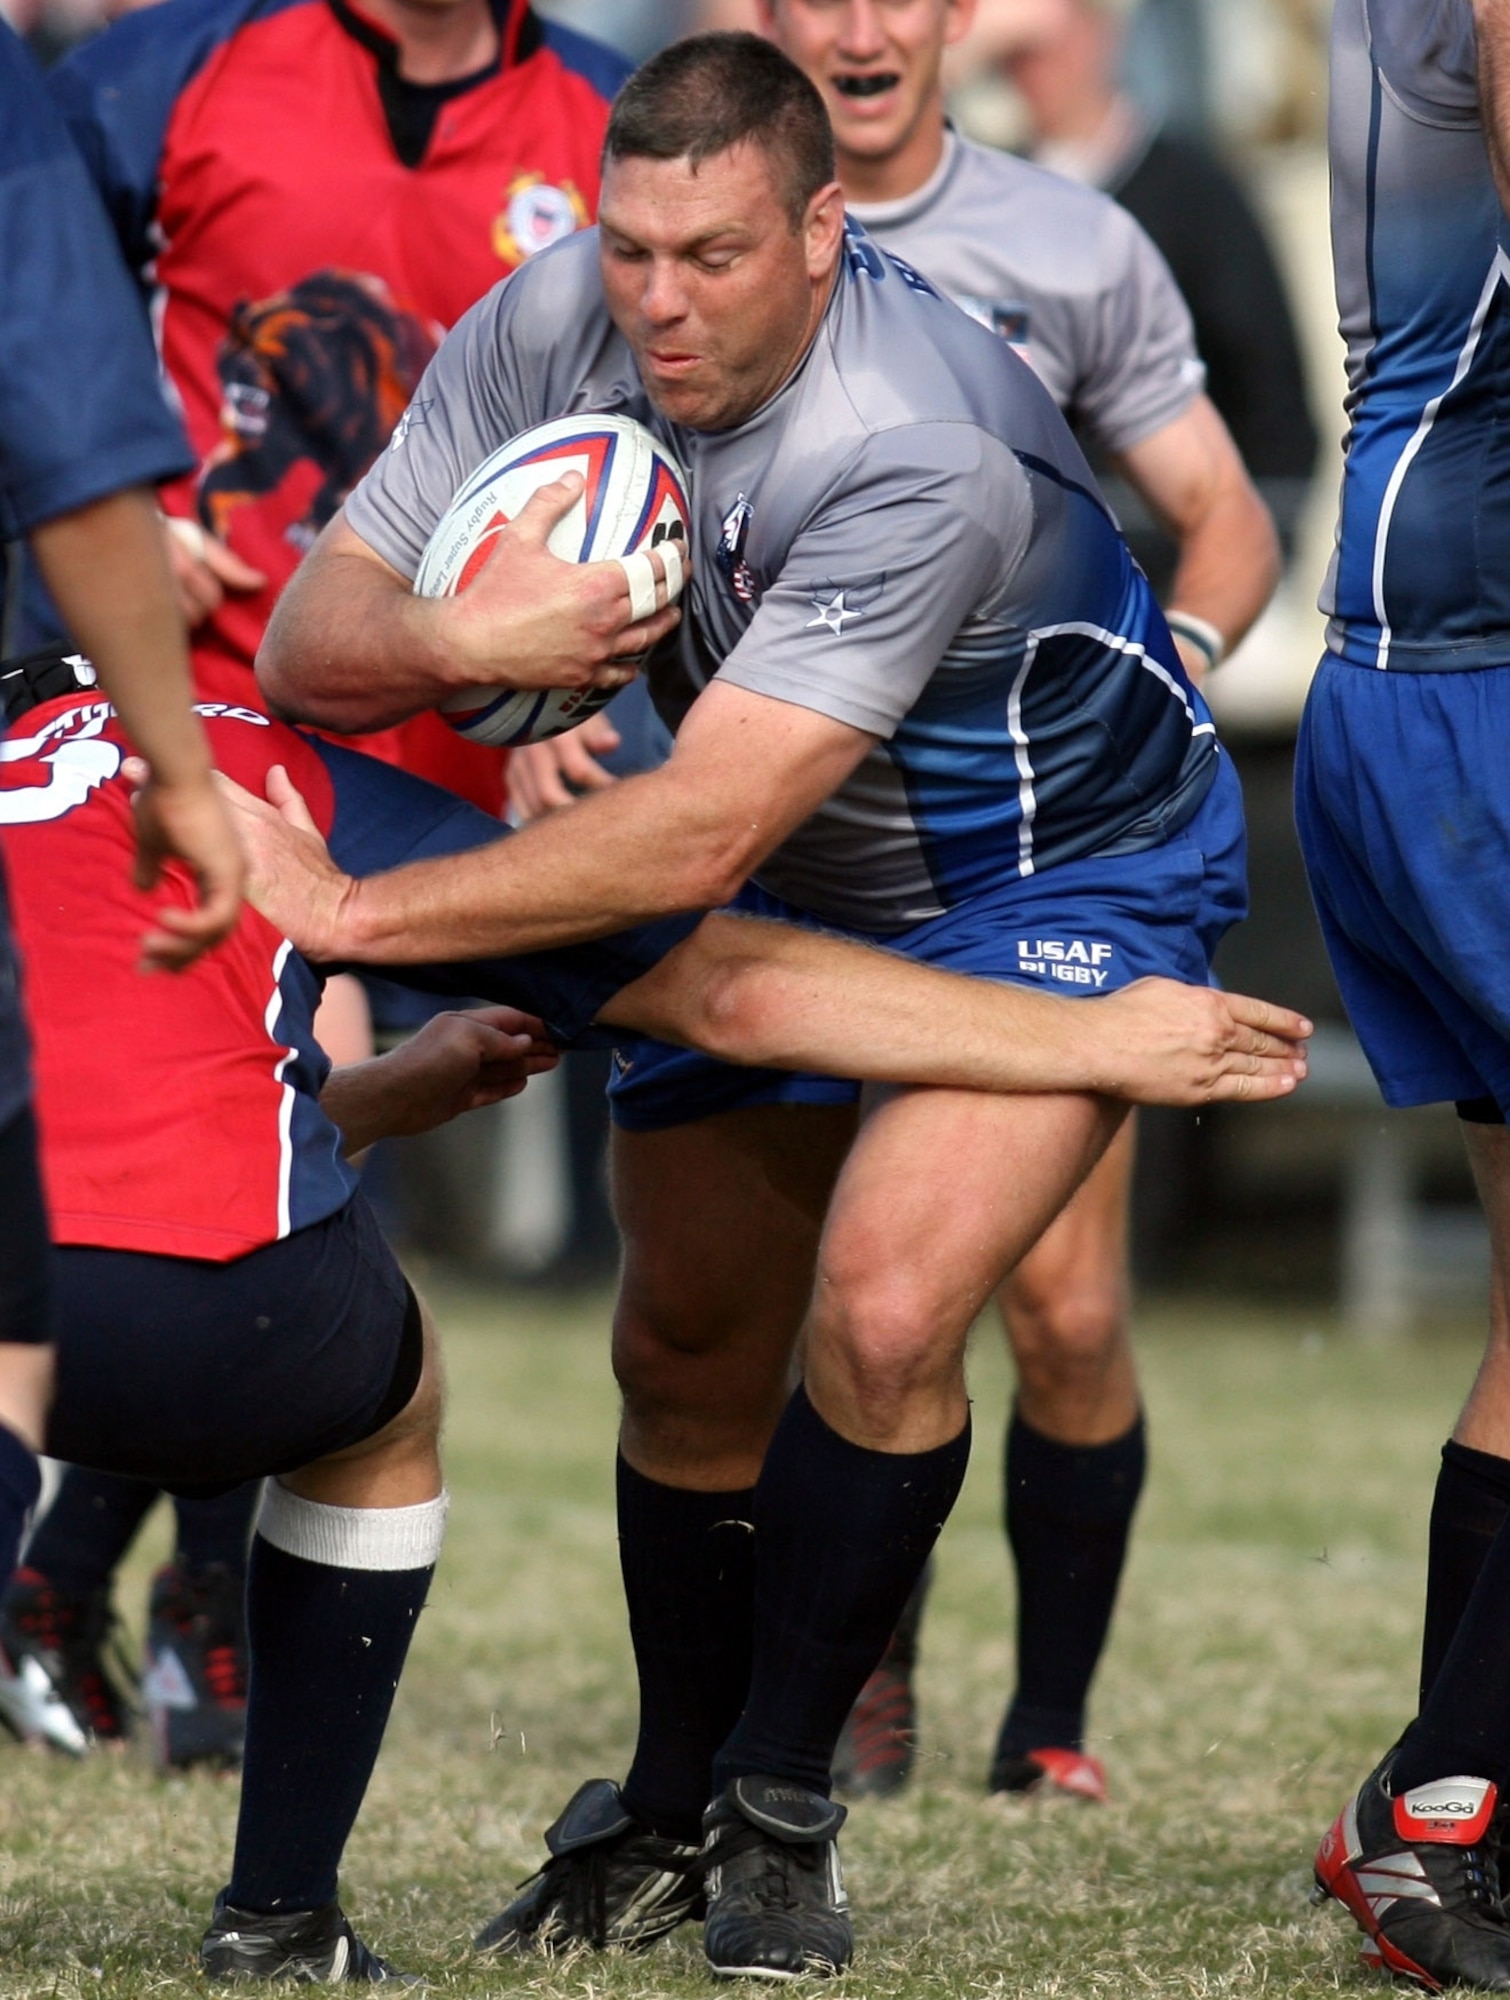 Air Force Maj. Kevin Groff runs through Coast Guard defenders during their match Oct. 24 at the Armed Forces Rugby Championship at Camp Lejeune, N.C.  The Air Force team, which went on to win its third consecutive tournament title, defeated the Coast Guard team 37-3.  (U.S. Air Force photo/Major Scott Foley)